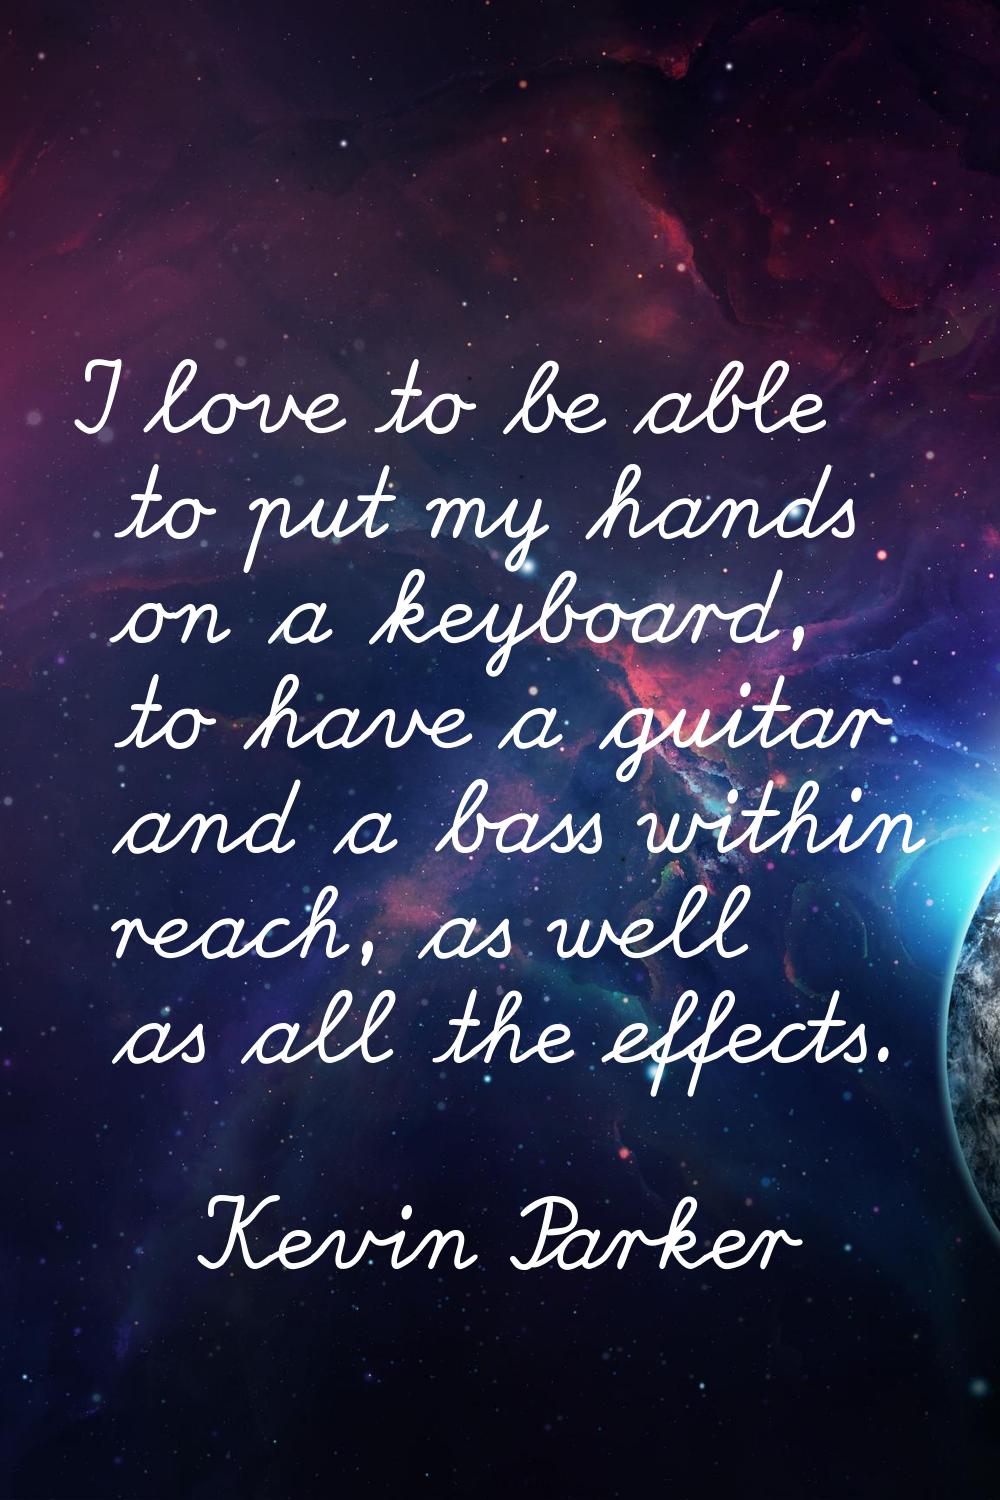 I love to be able to put my hands on a keyboard, to have a guitar and a bass within reach, as well 